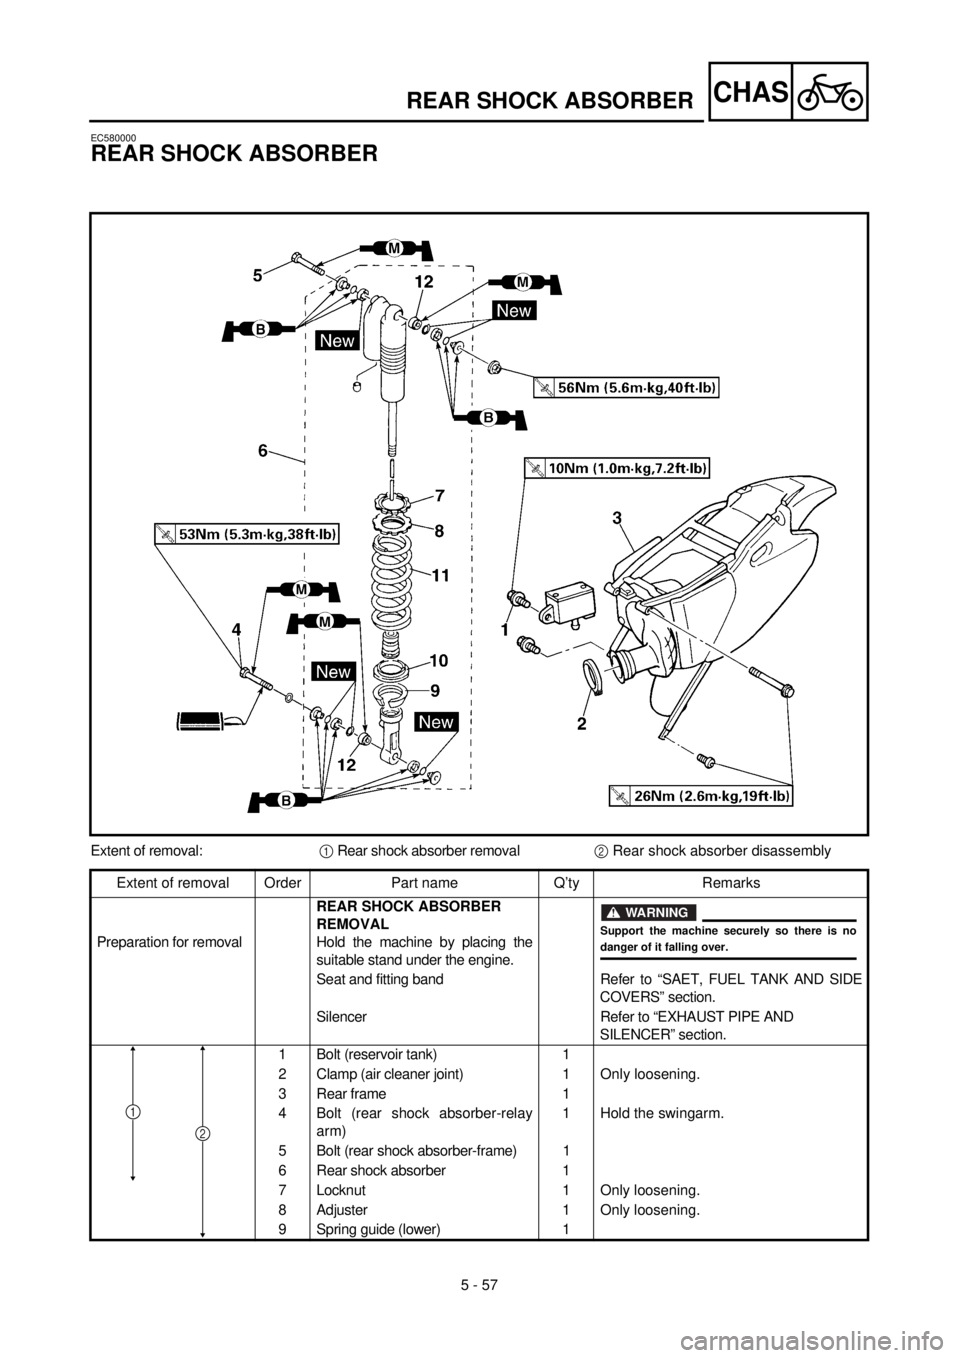 YAMAHA YZ426F 2000  Owners Manual 5 - 57
CHASREAR SHOCK ABSORBER
EC580000
REAR SHOCK ABSORBER
Extent of removal:1 Rear shock absorber removal2 Rear shock absorber disassembly
Extent of removal Order Part name Q’ty Remarks
Preparatio